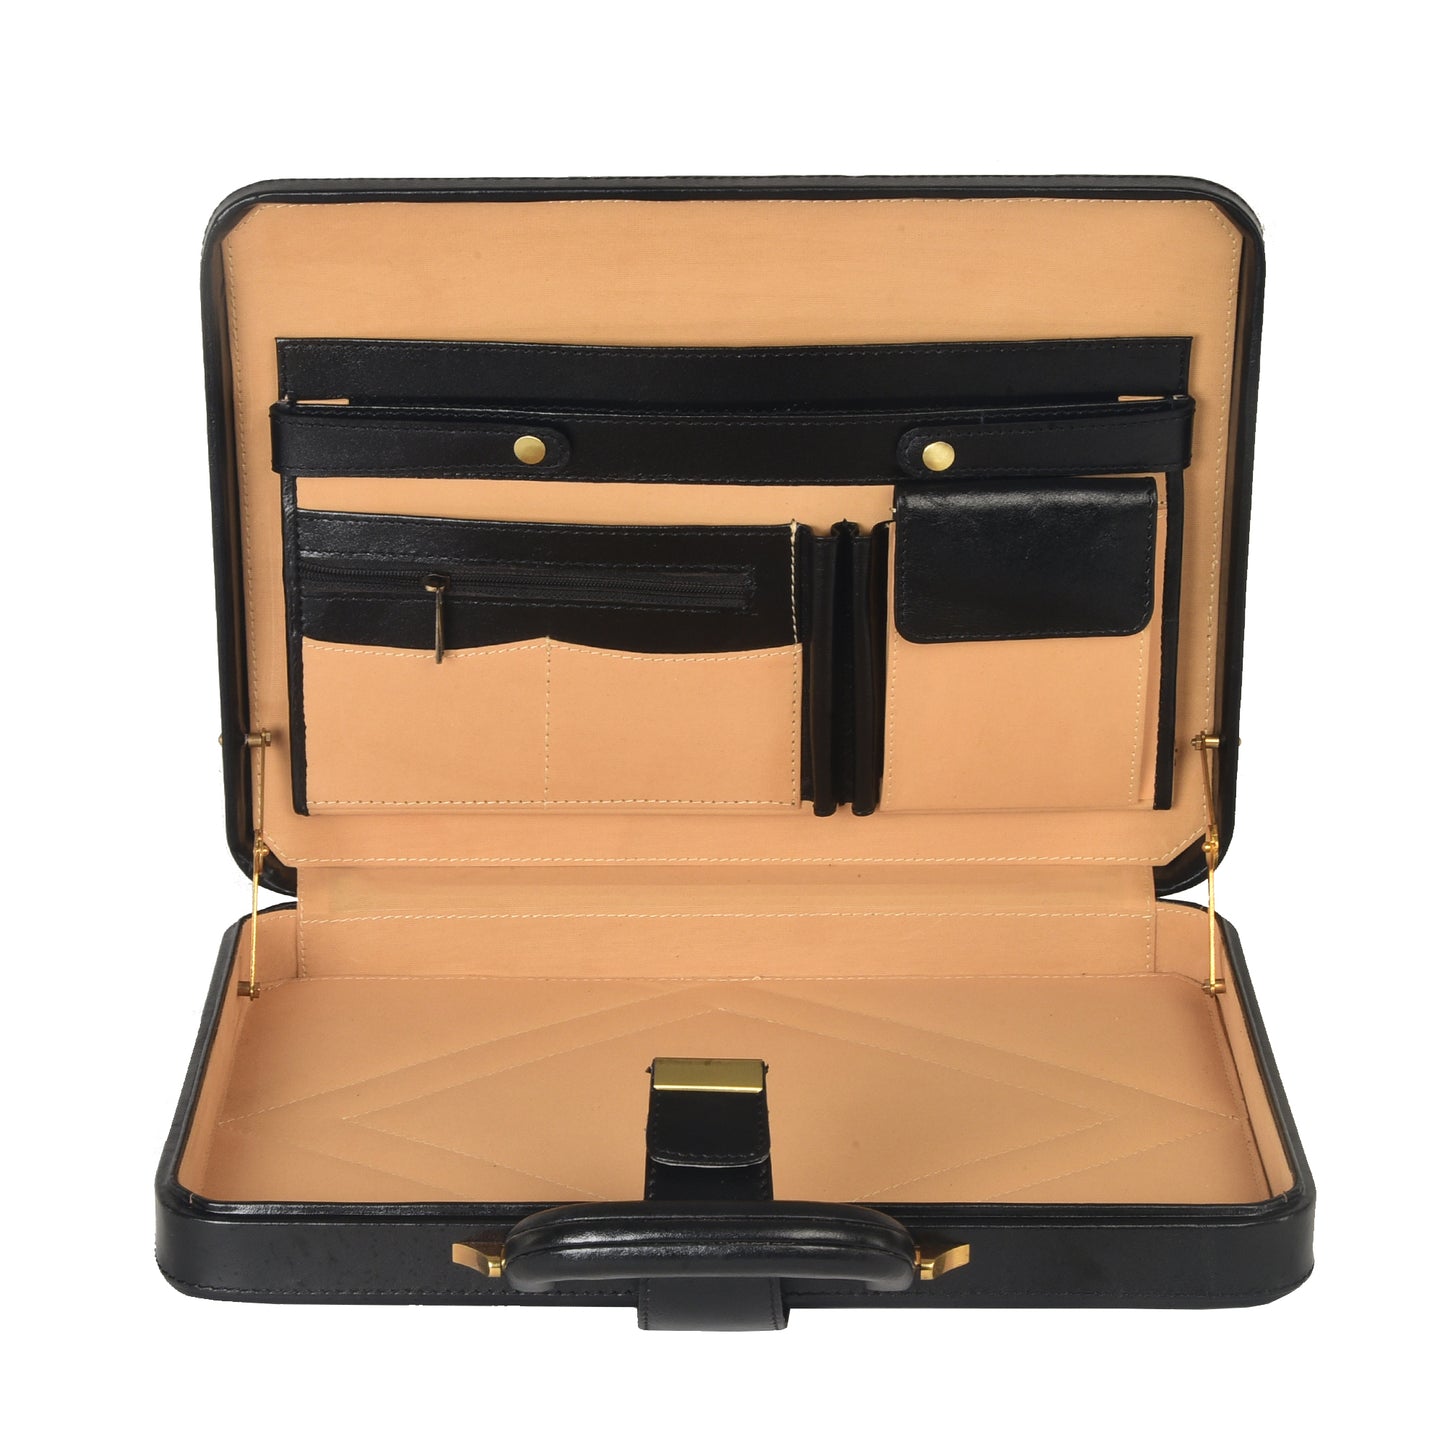 Genuine Leather Attache Briefcase for Men's Office Handbag Doctor Briefcase Leather Laptop MacBook Carry Case Leather File Organizer